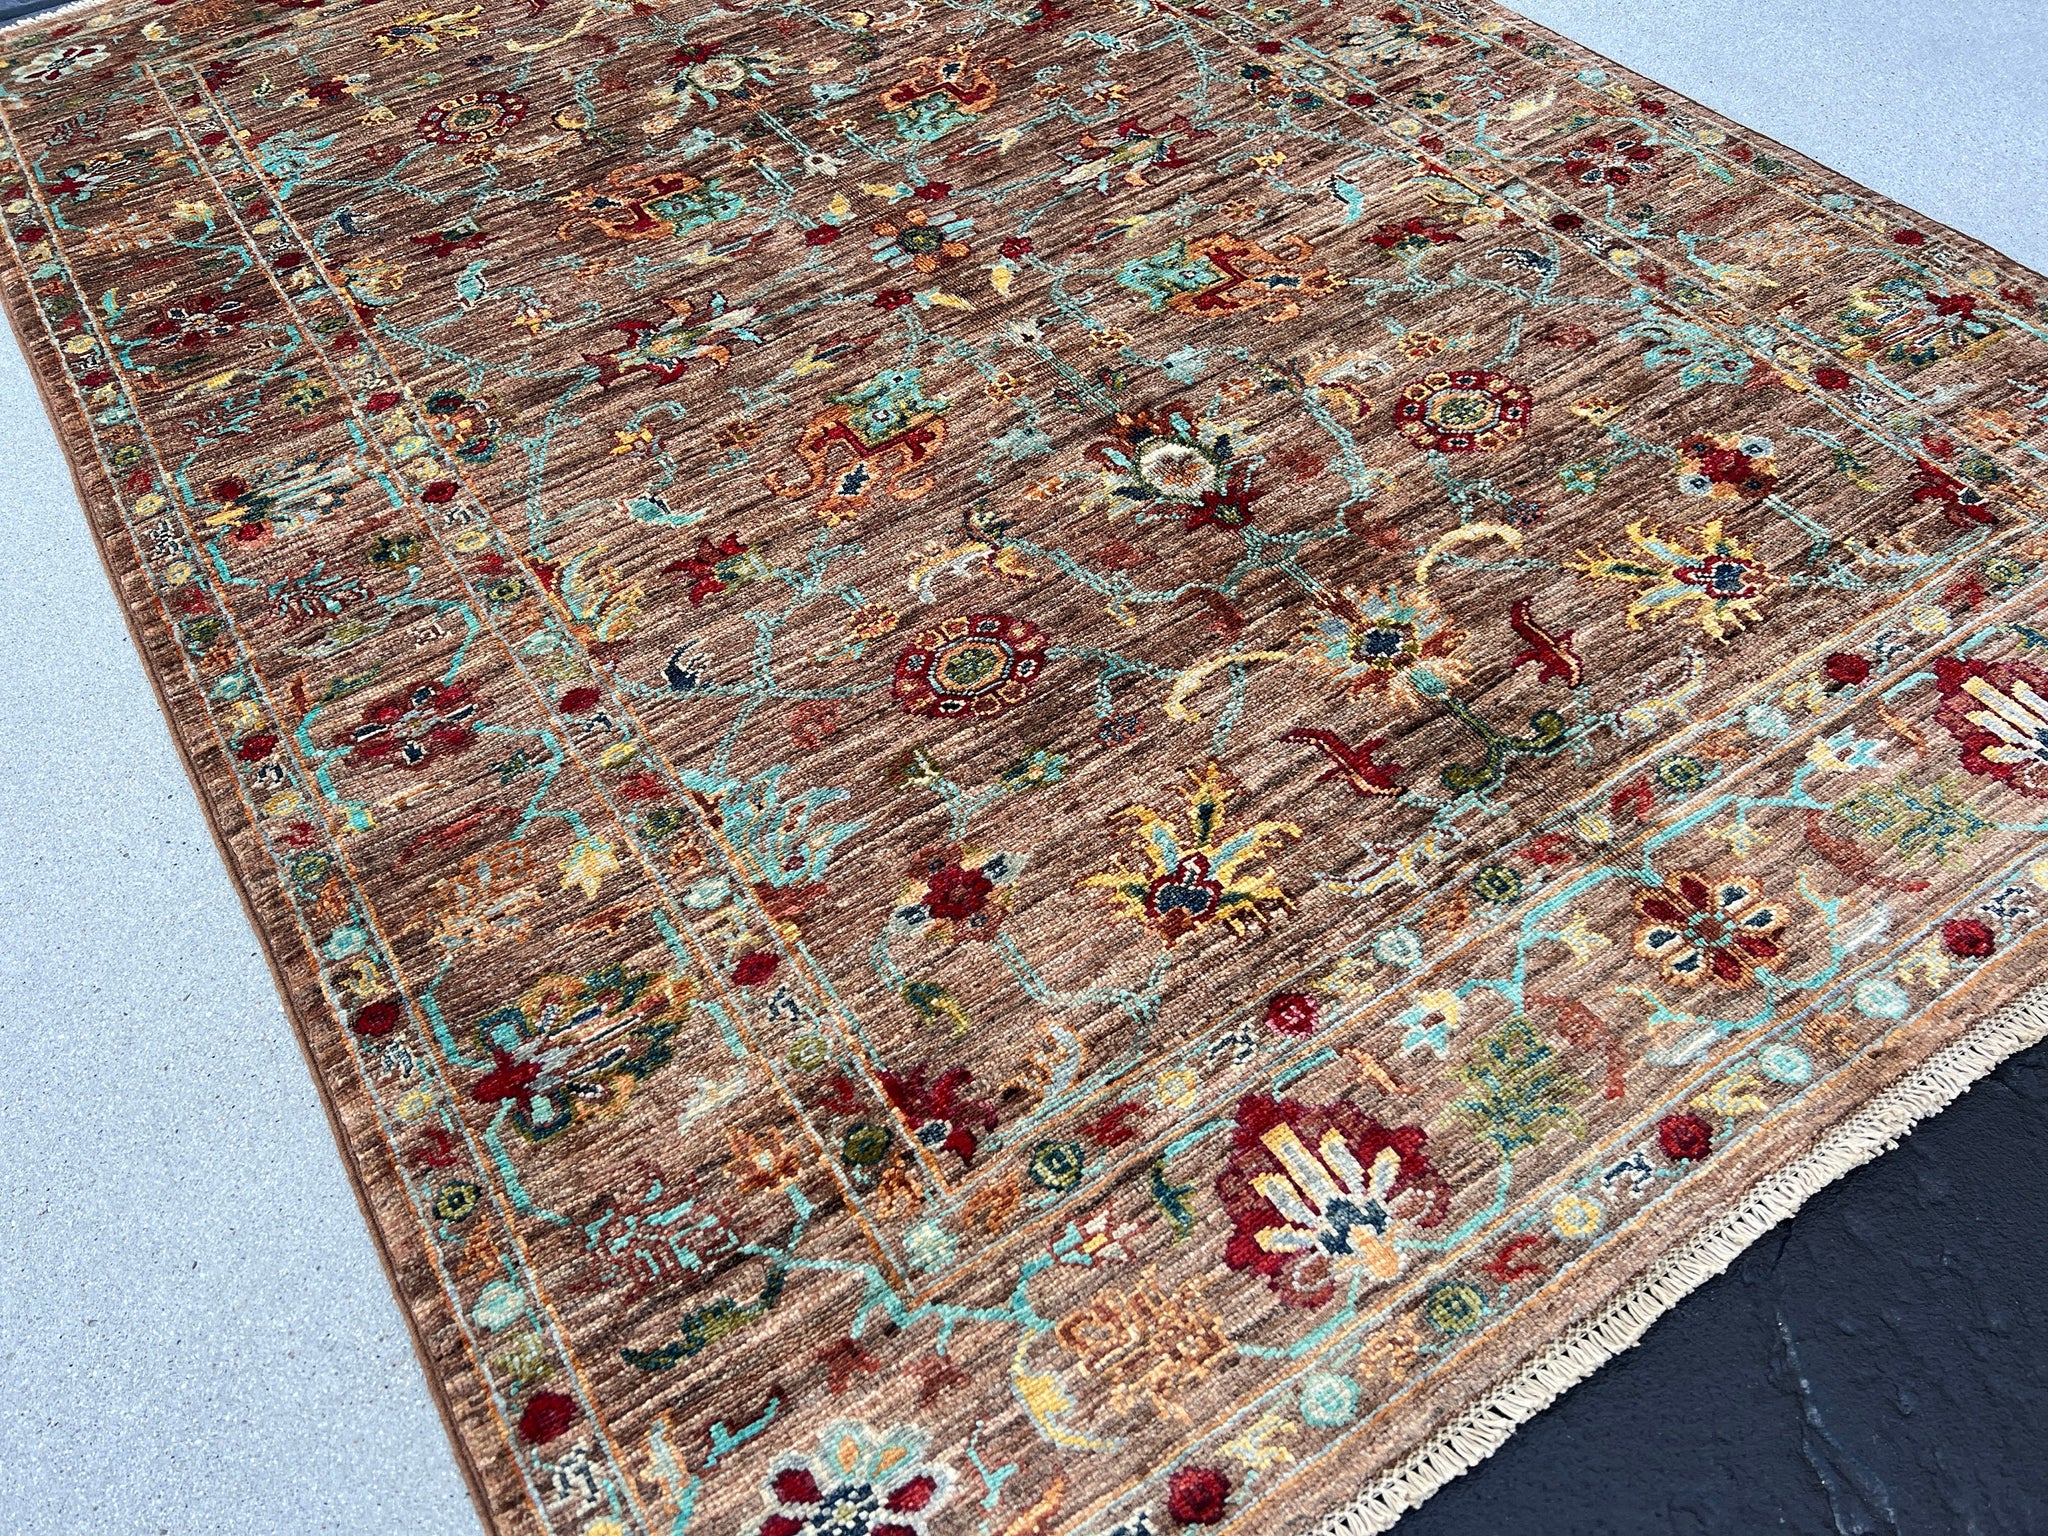 4x6 Handmade Afghan Rug | Brown Mauve Sky Baby Prussian Blue Teal Ivory Maroon Moss Green Red Yellow Orange | Knotted Persian Oriental Wool